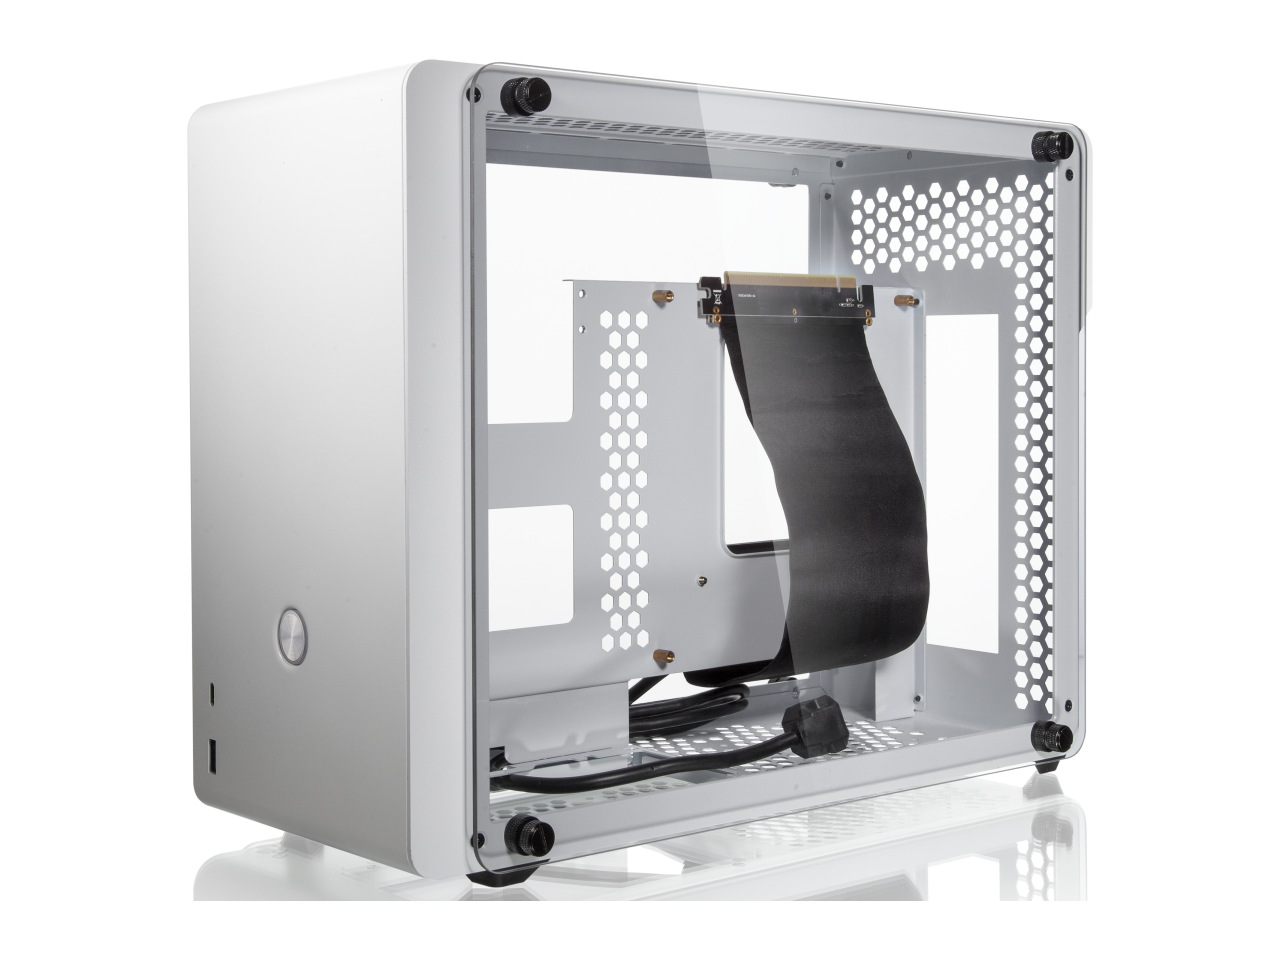 RAIJINTEK OPHION EVO WHITE, a SFF case (Mini-ITX), is designed to fulfill a smallest case built with max. possibility high-end, gaming and standard components.